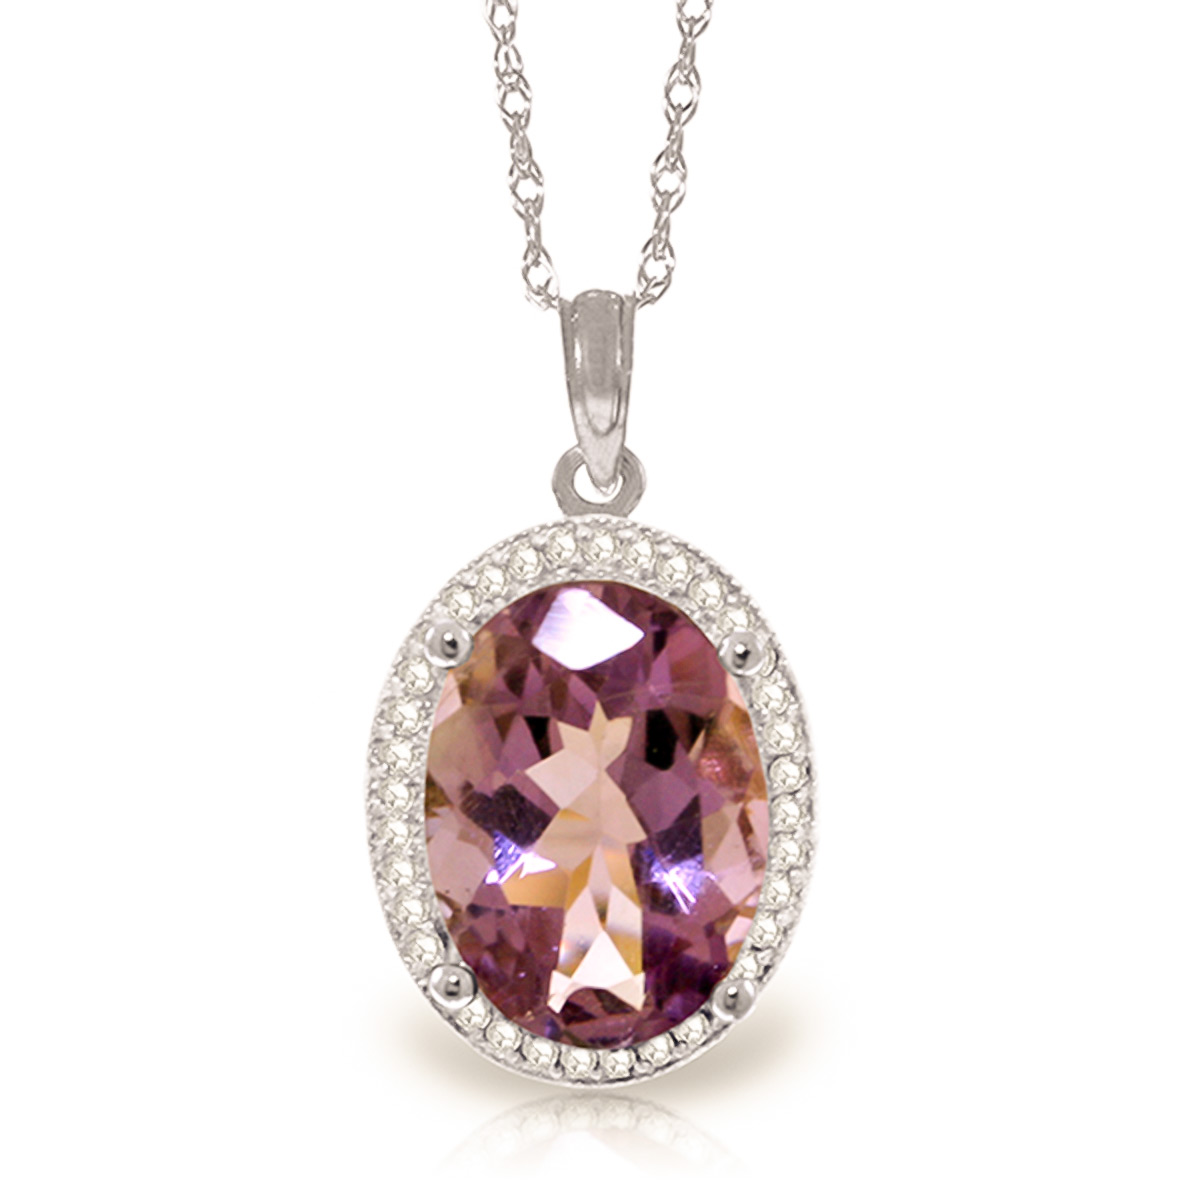 Amethyst Halo Pendant Necklace 5.28 ctw in 9ct White Gold